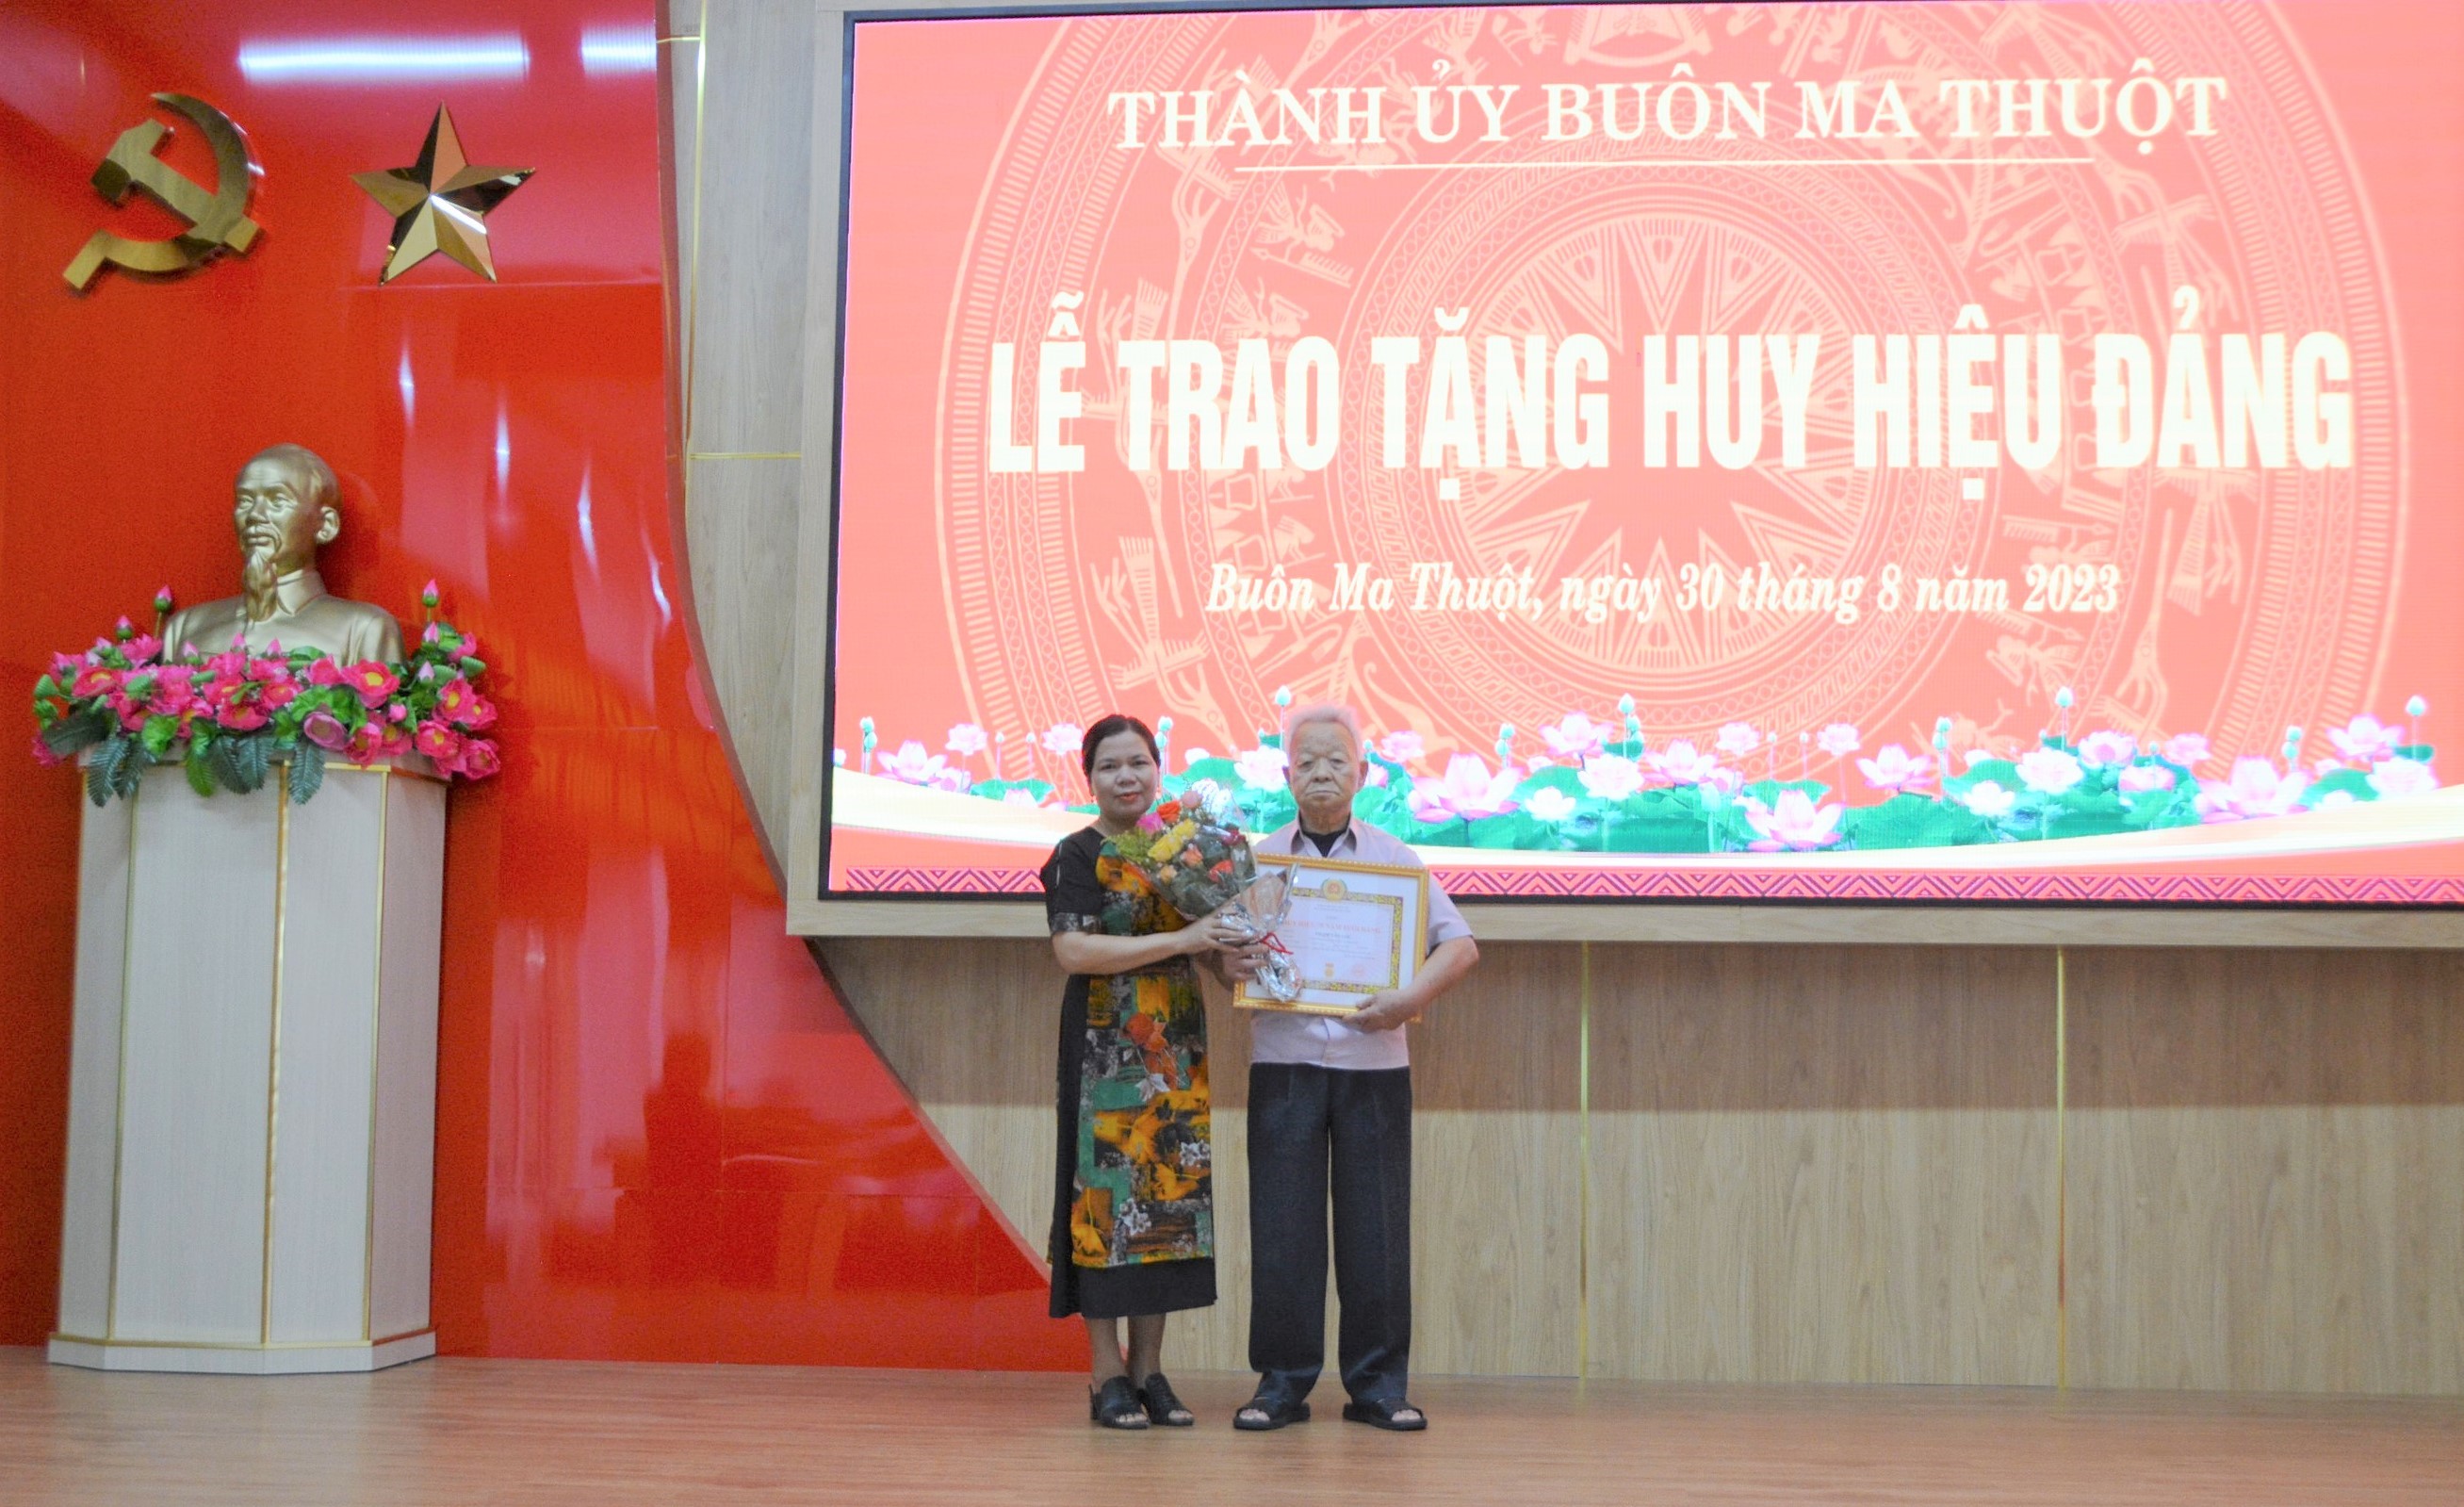 126 party members of the Buon Ma Thuot city party committee were awarded and posthumously awarded the Party Badge on the occasion of September 2